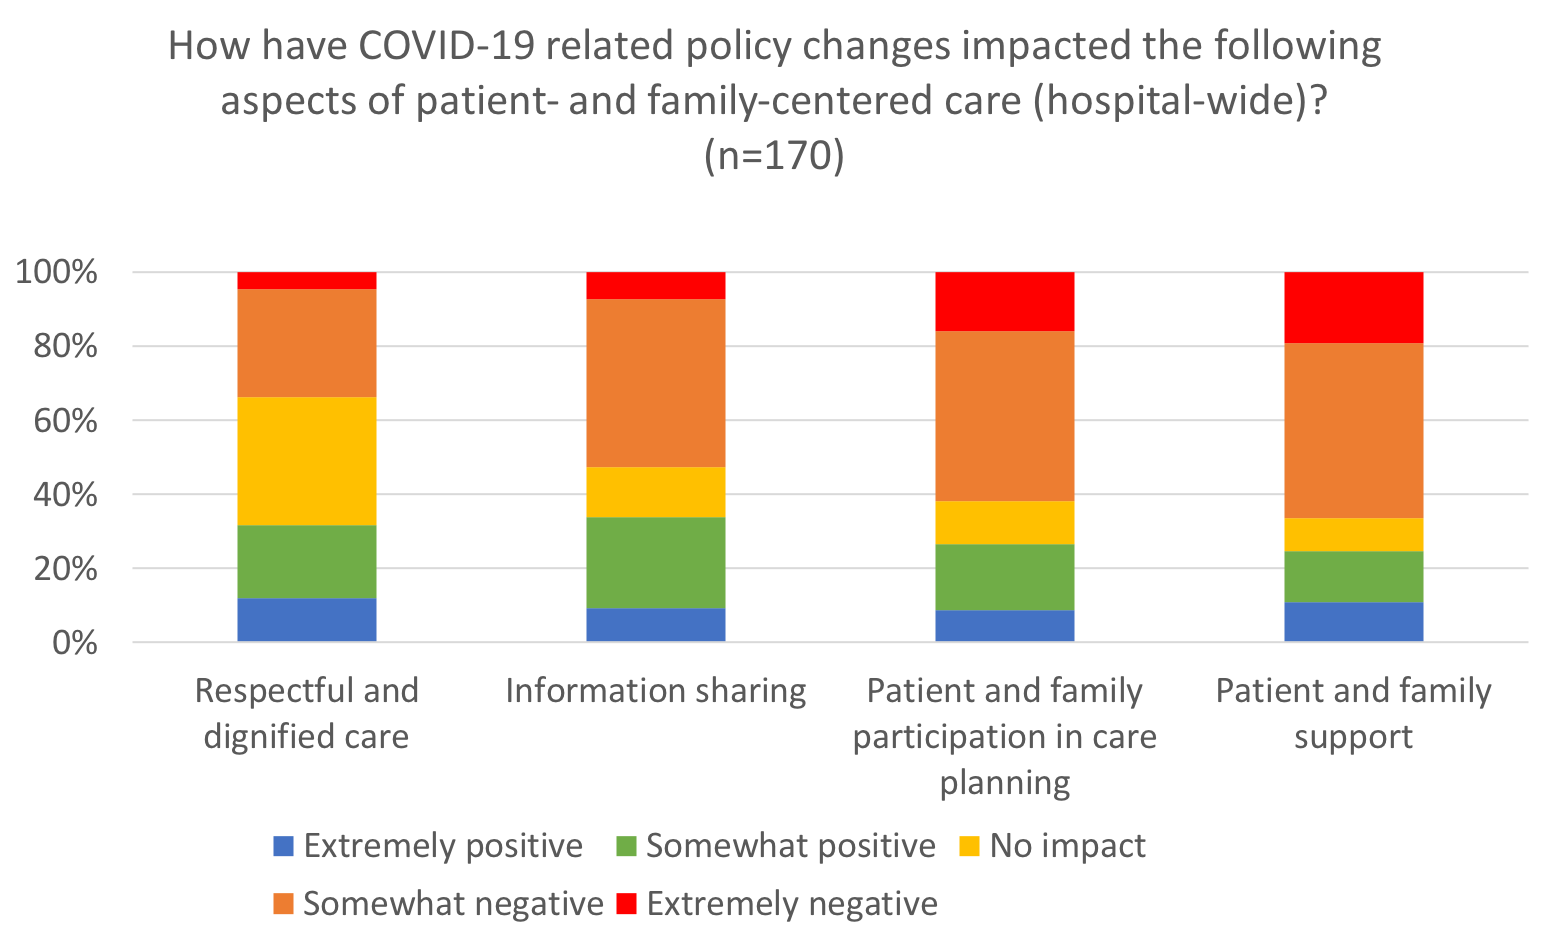 How have COVID-19 related policy changes impacted the following aspects of patient- and family-centered care (hospital-wide)? (n=116)